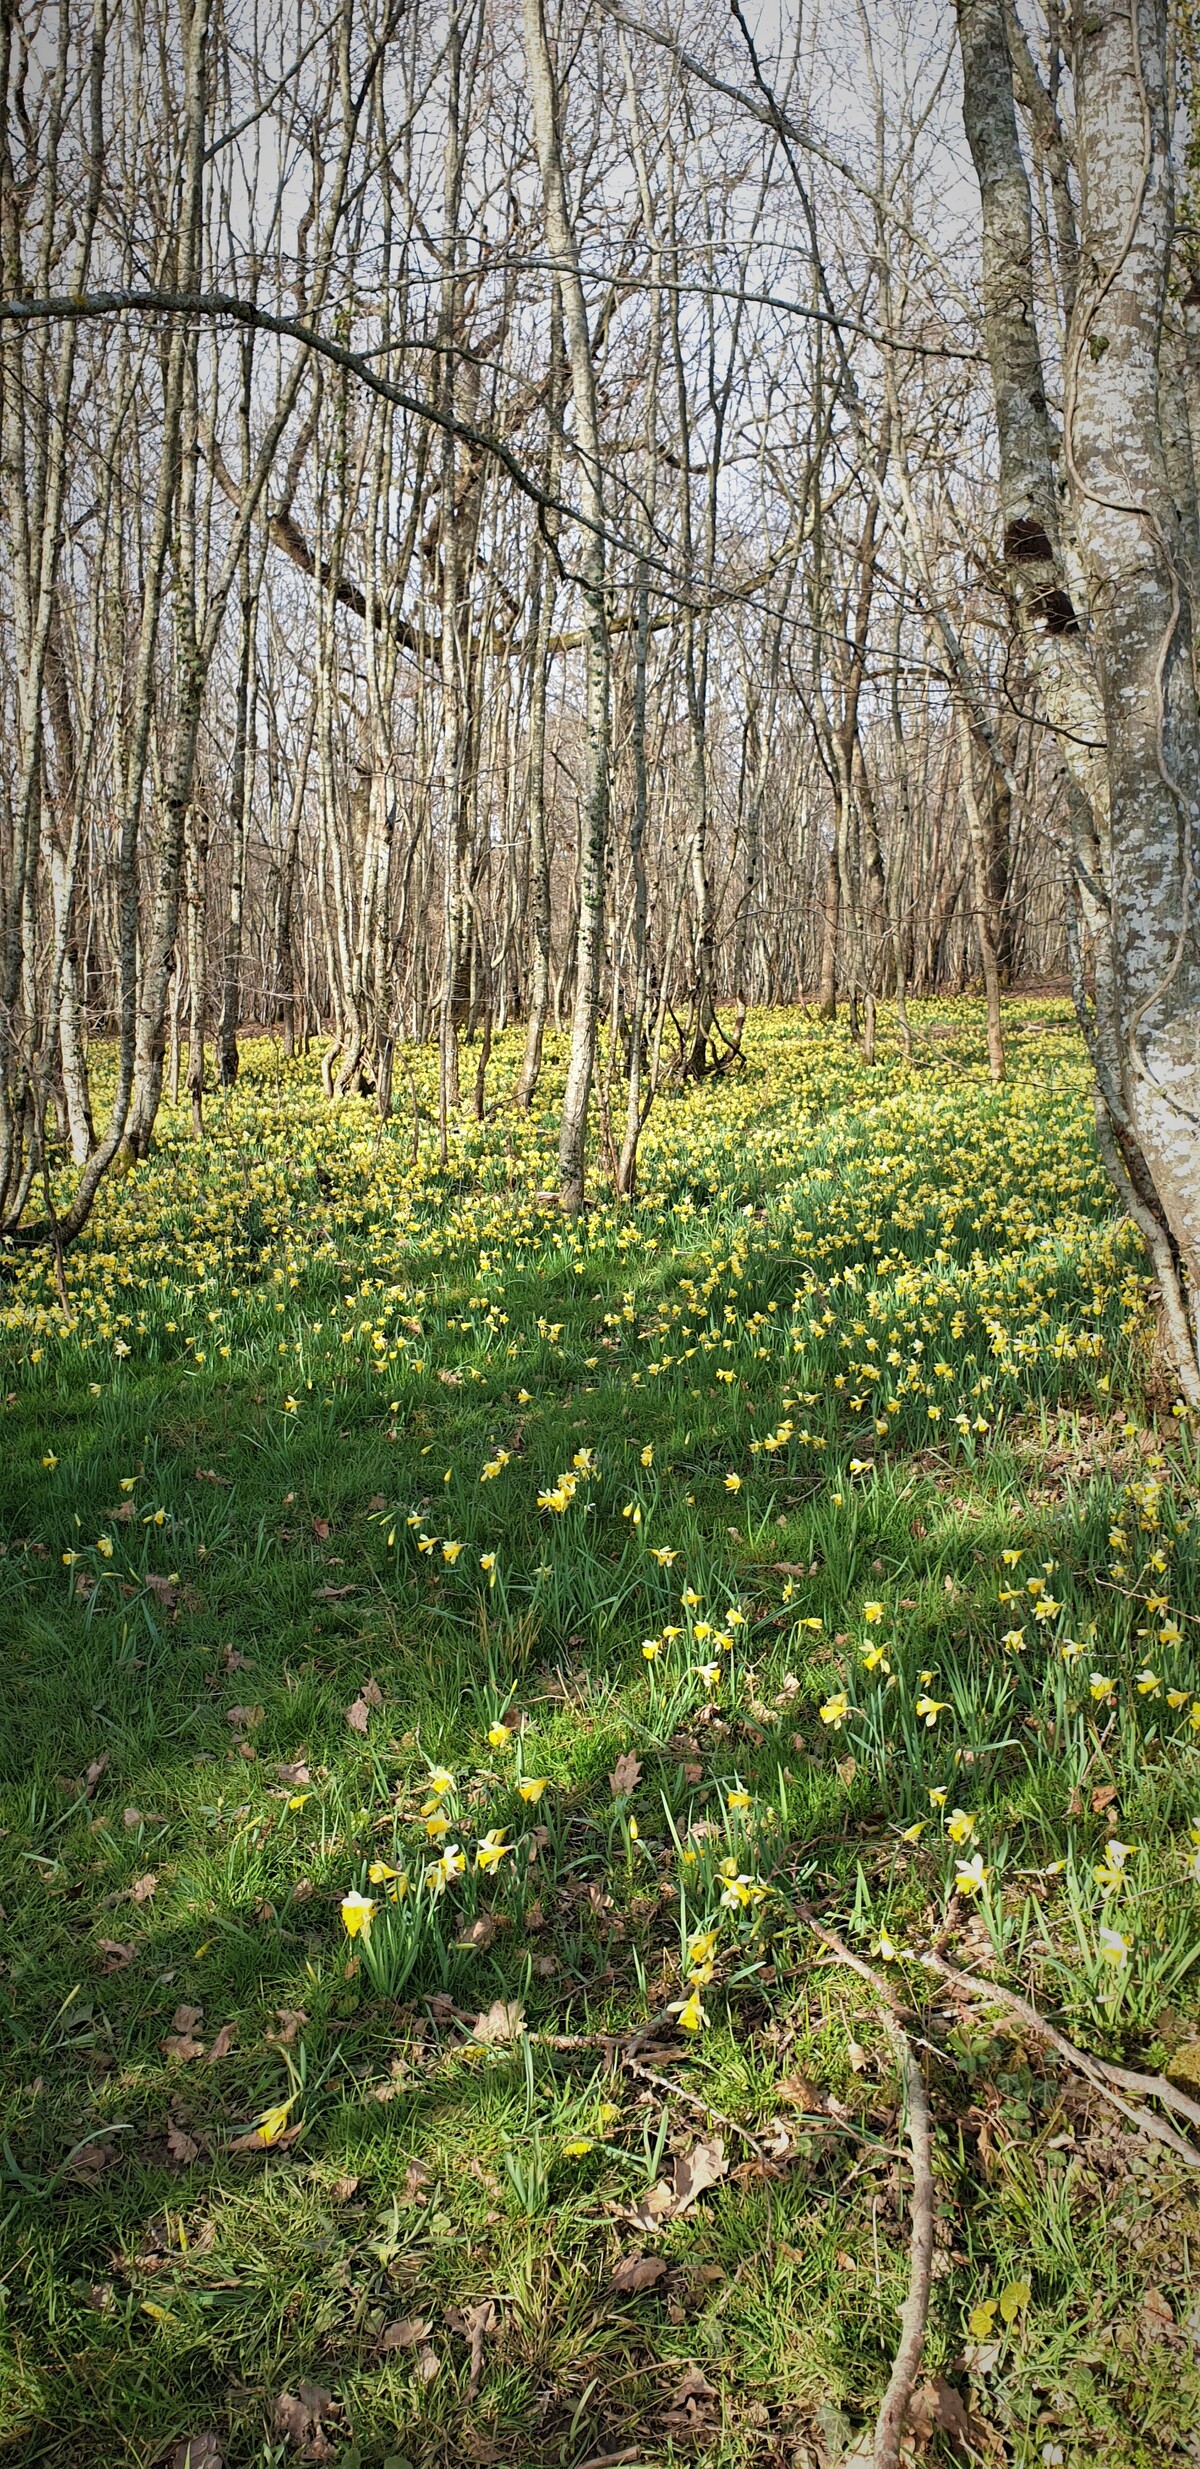 jonquilles sauvages